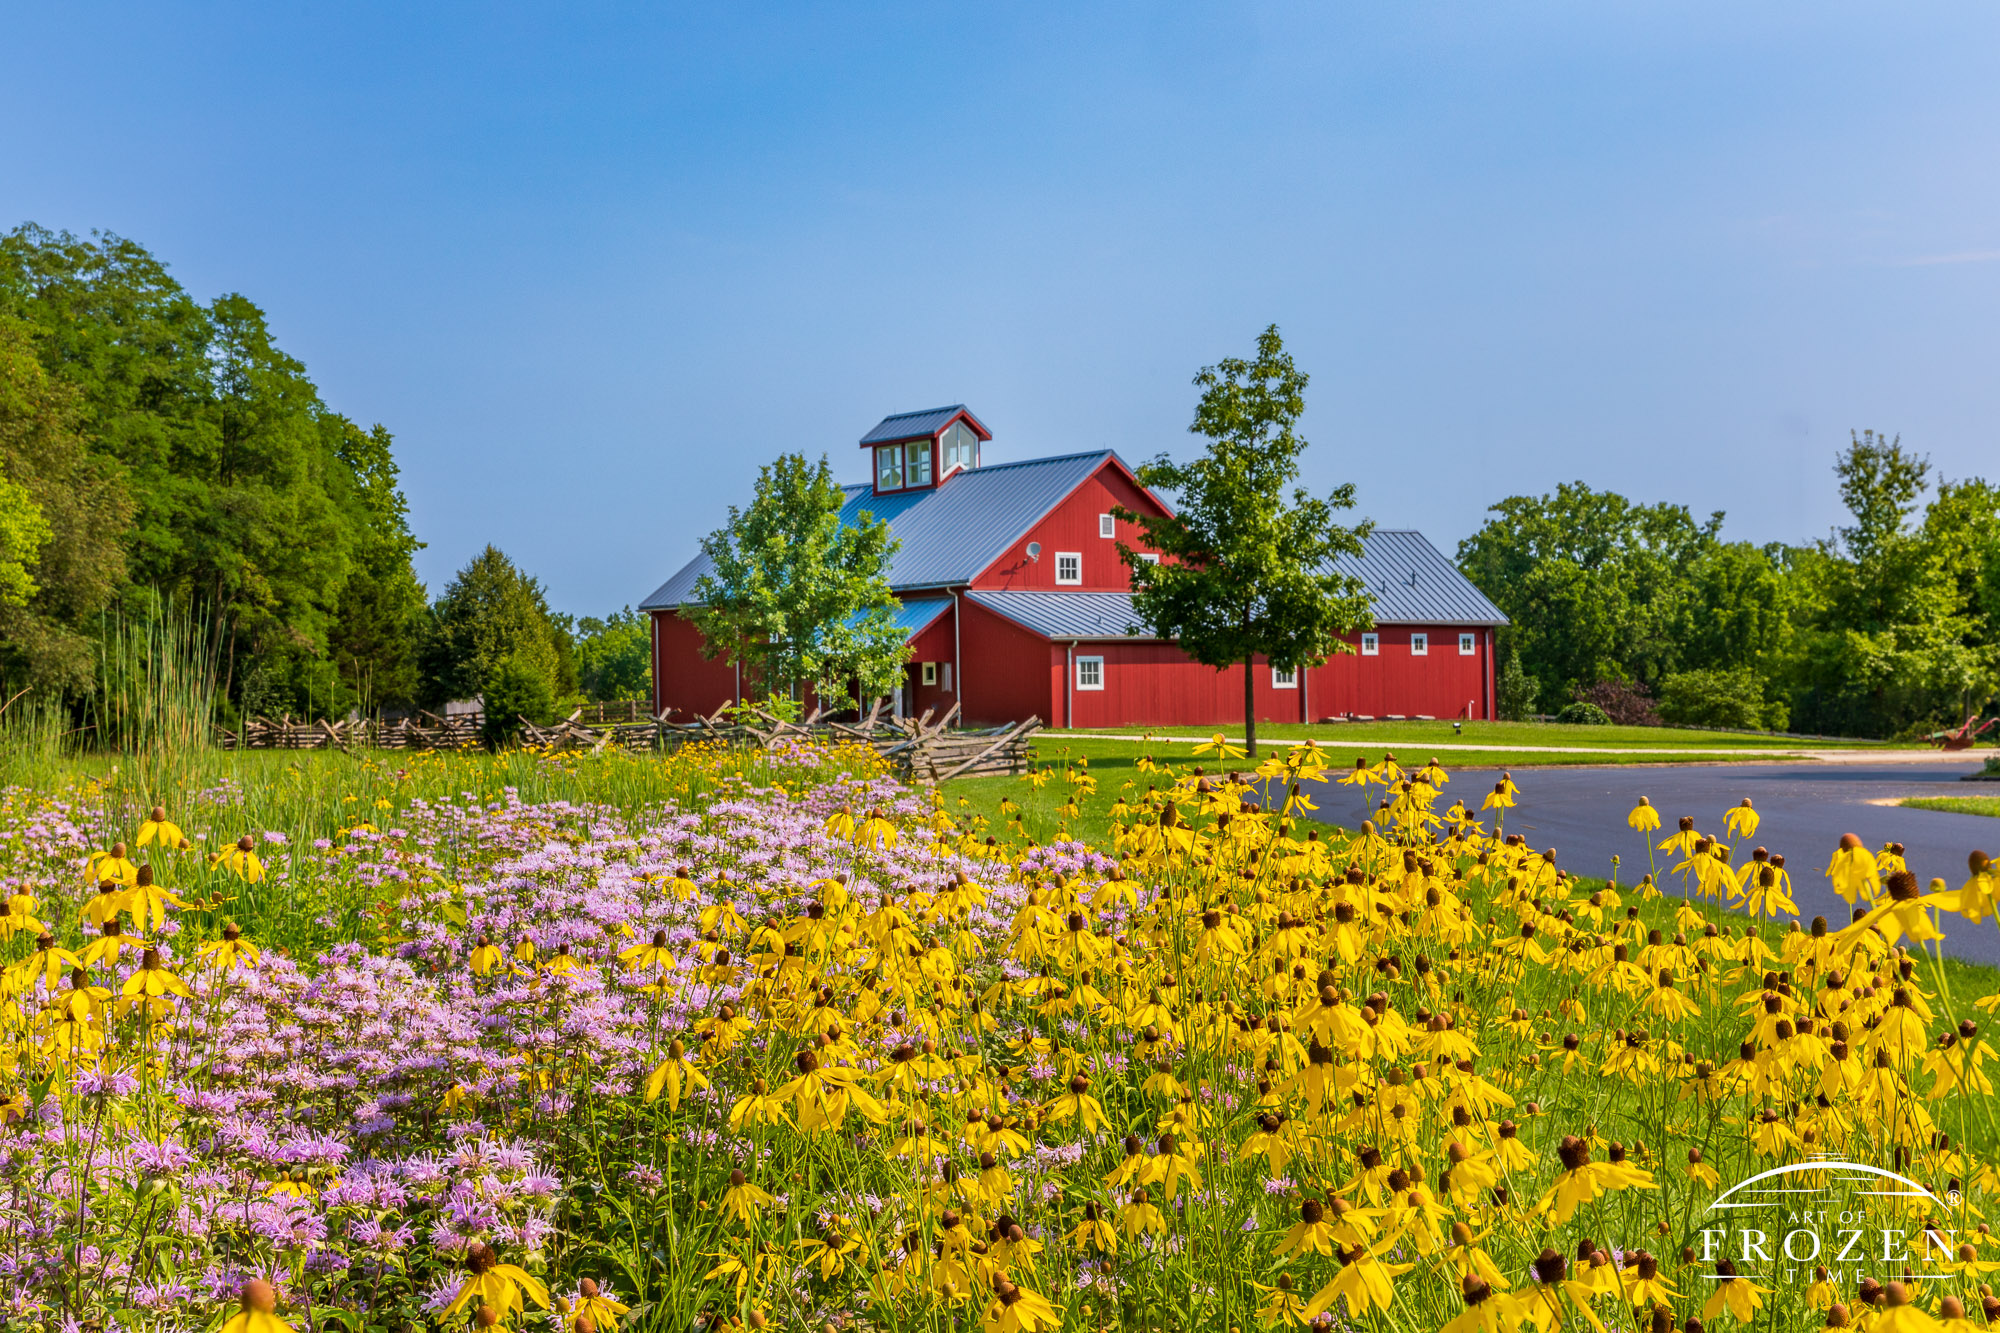 A field of Wild Bergamot and Grey-headed Coneflower in the foreground as the bright red Carriage Hill Visitor Center resides in the background.